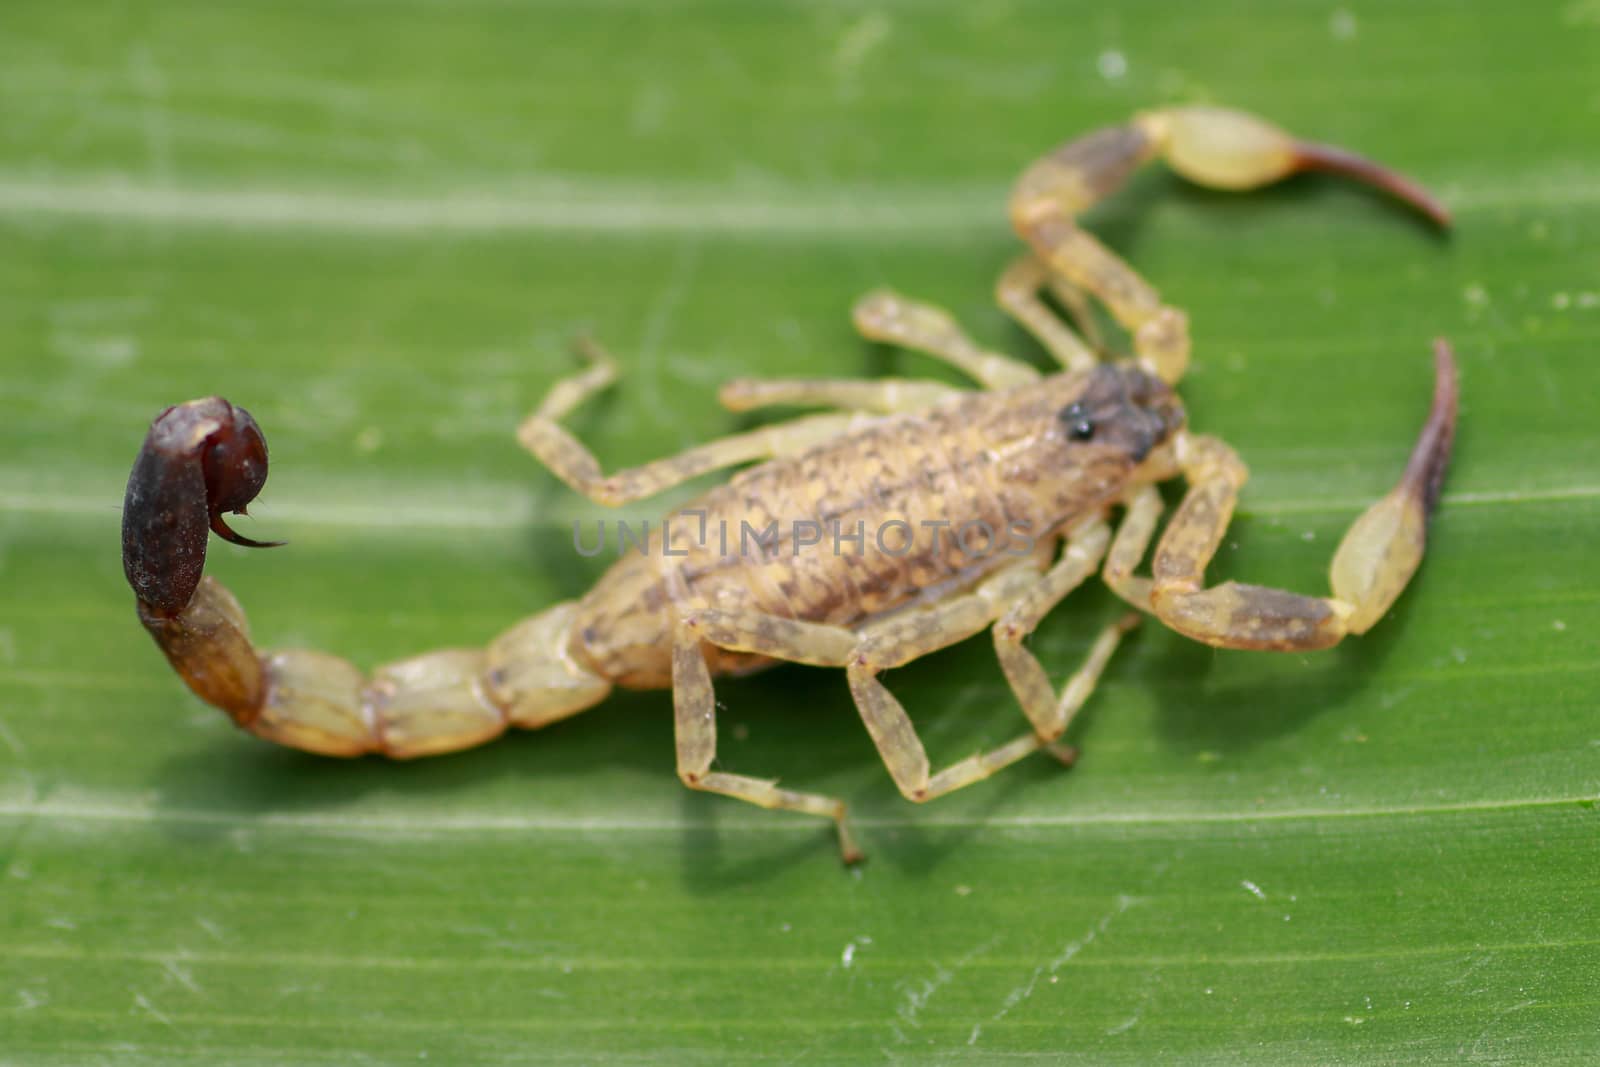 Top view of Deathstalker on green leaf in nature. Leiurus quinquestriatus is a species of scorpion, a member of the Buthidae family. It is also known as the Israeli yellow scorpion Omdurman scorpion.